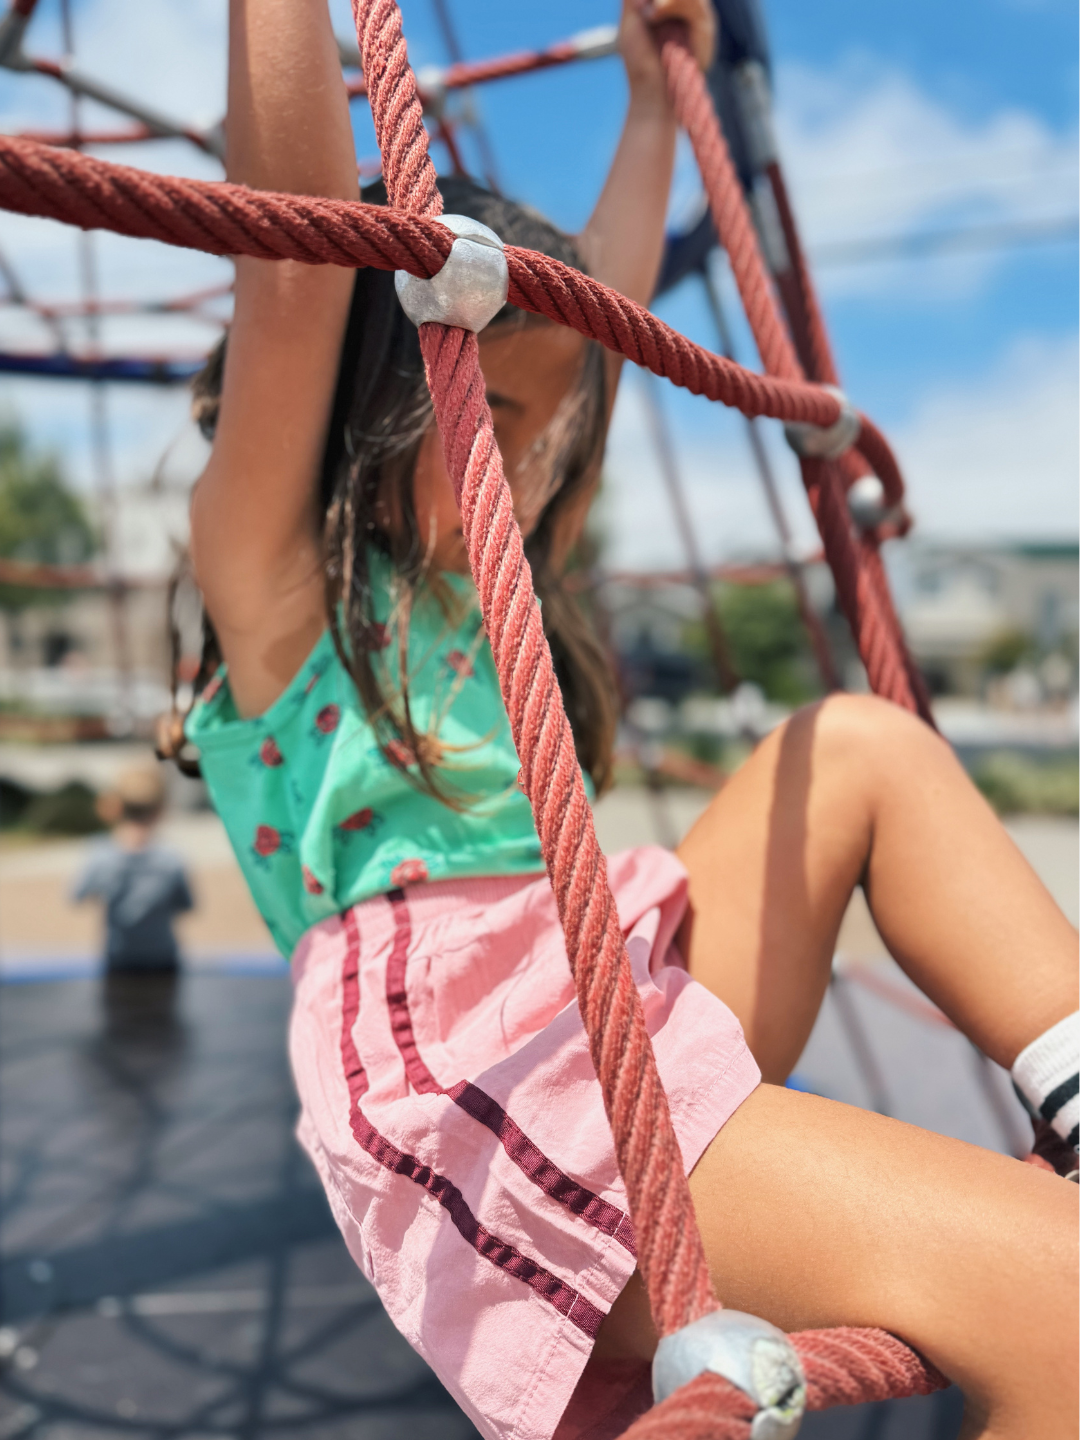 Girl wearing the kids track shorts in dusty pink with maroon stripes down the side. She also wears a green tank top patterned with red roses. She is climbing on a red rope play structure.